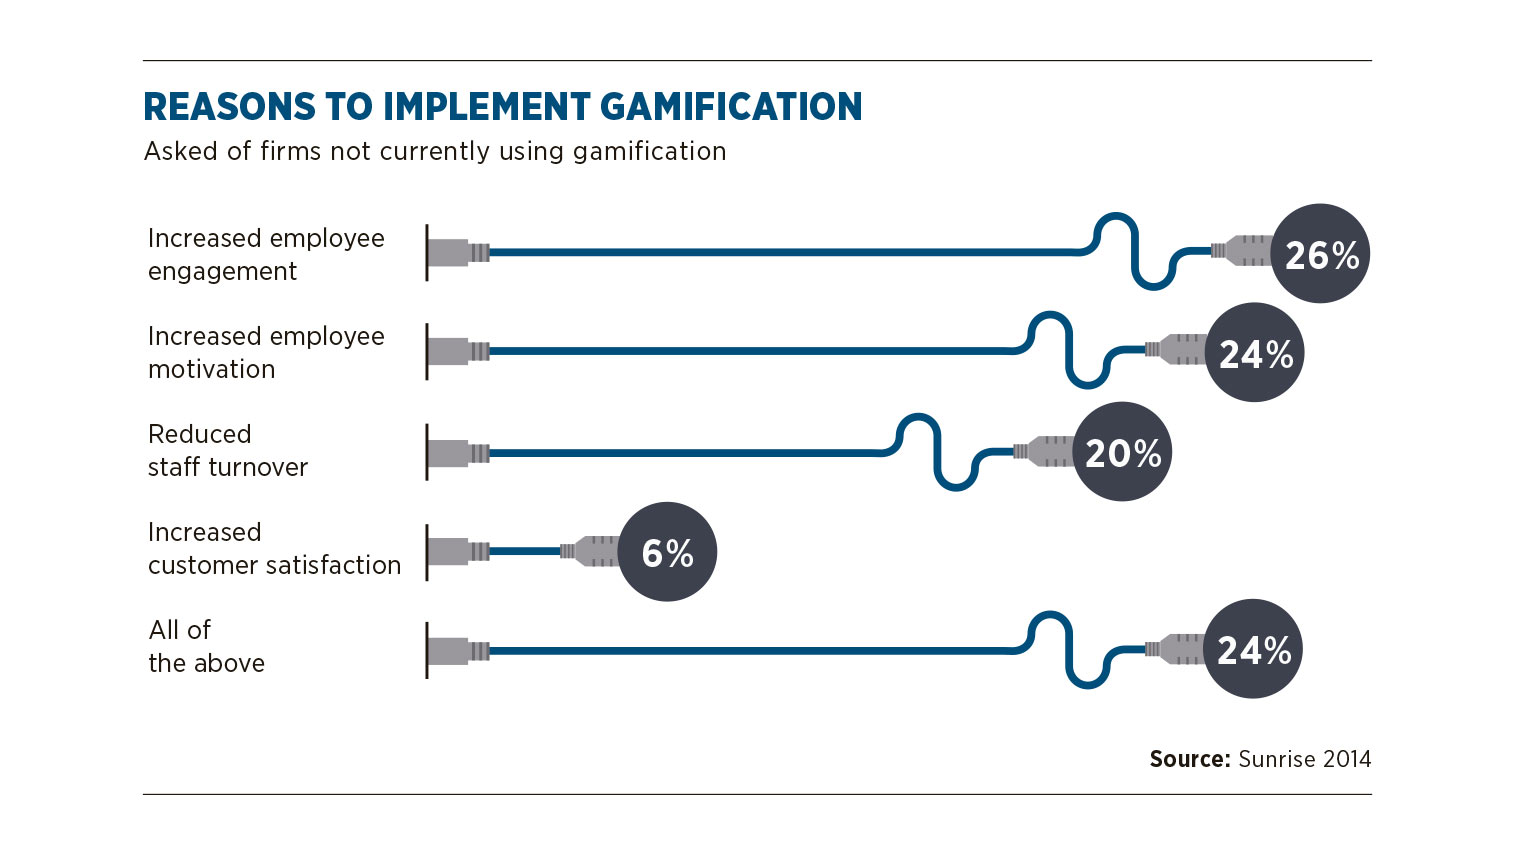 Reasons to implement gamification